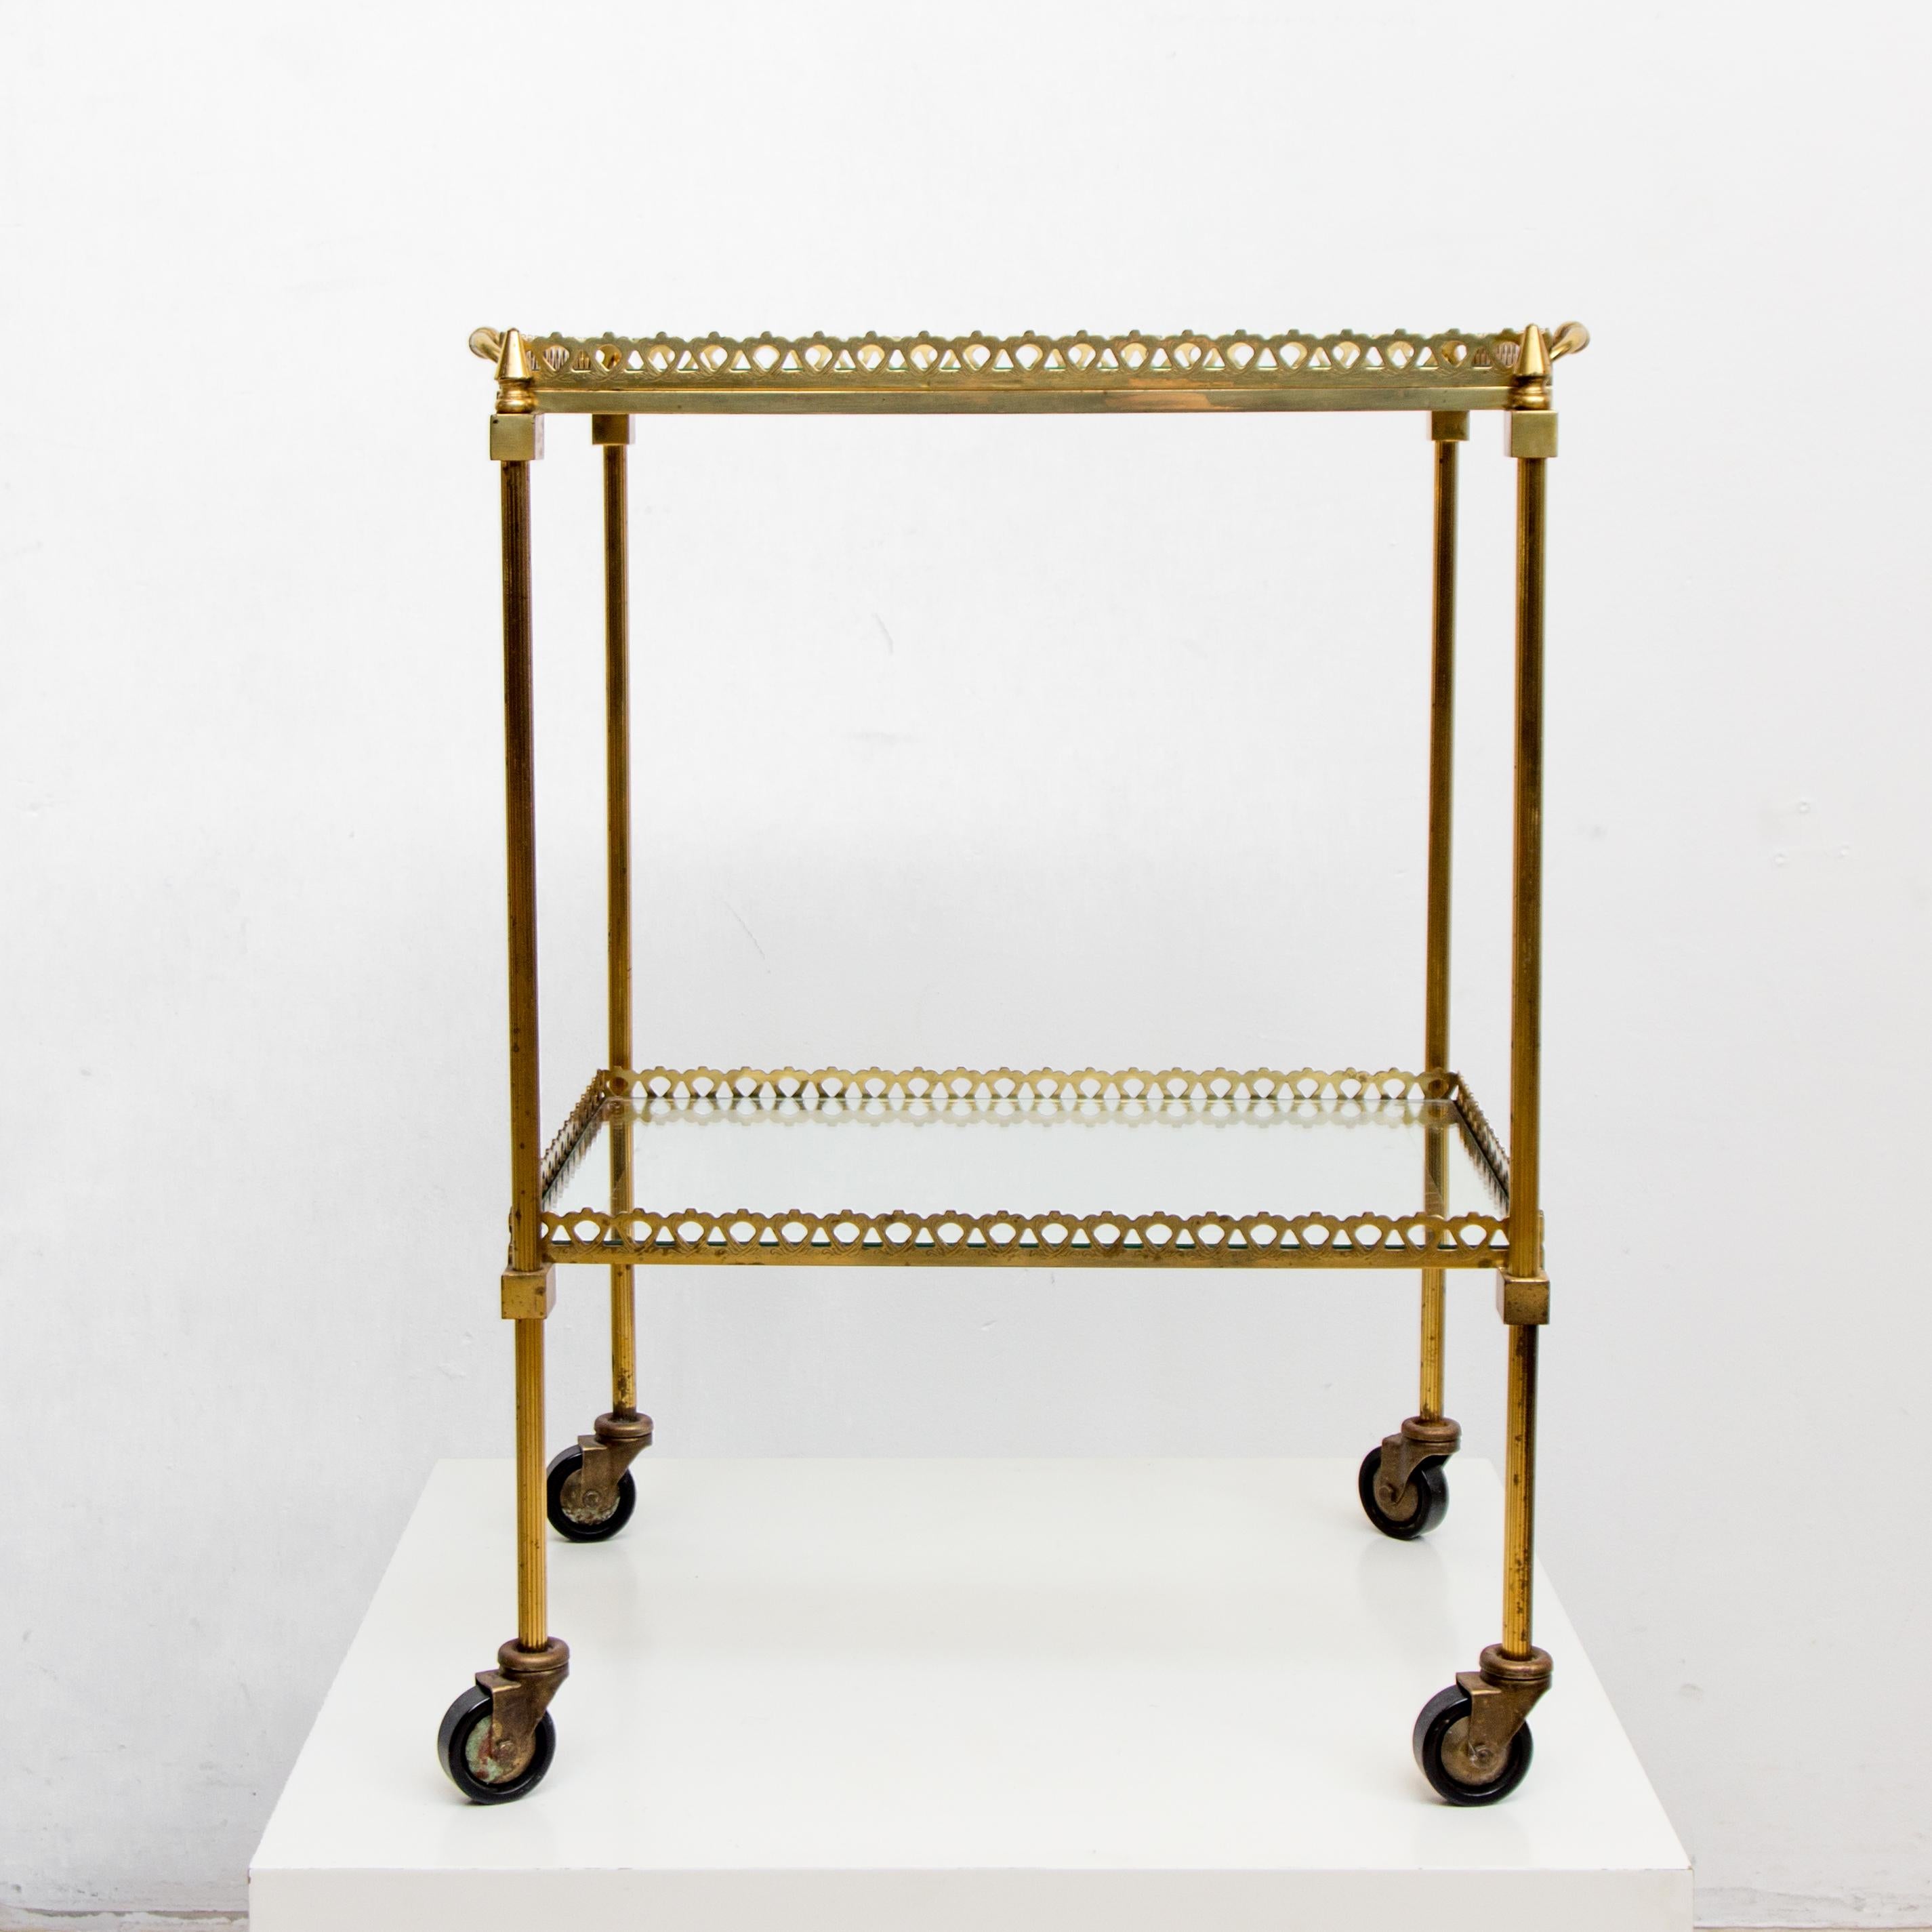 An elegant vintage Directoire style rectangular brass and glass cocktail cart with separate serving tray top, circa 1960s. Glass top is inset and has mirrored edge detail. In good aged vintage condition.